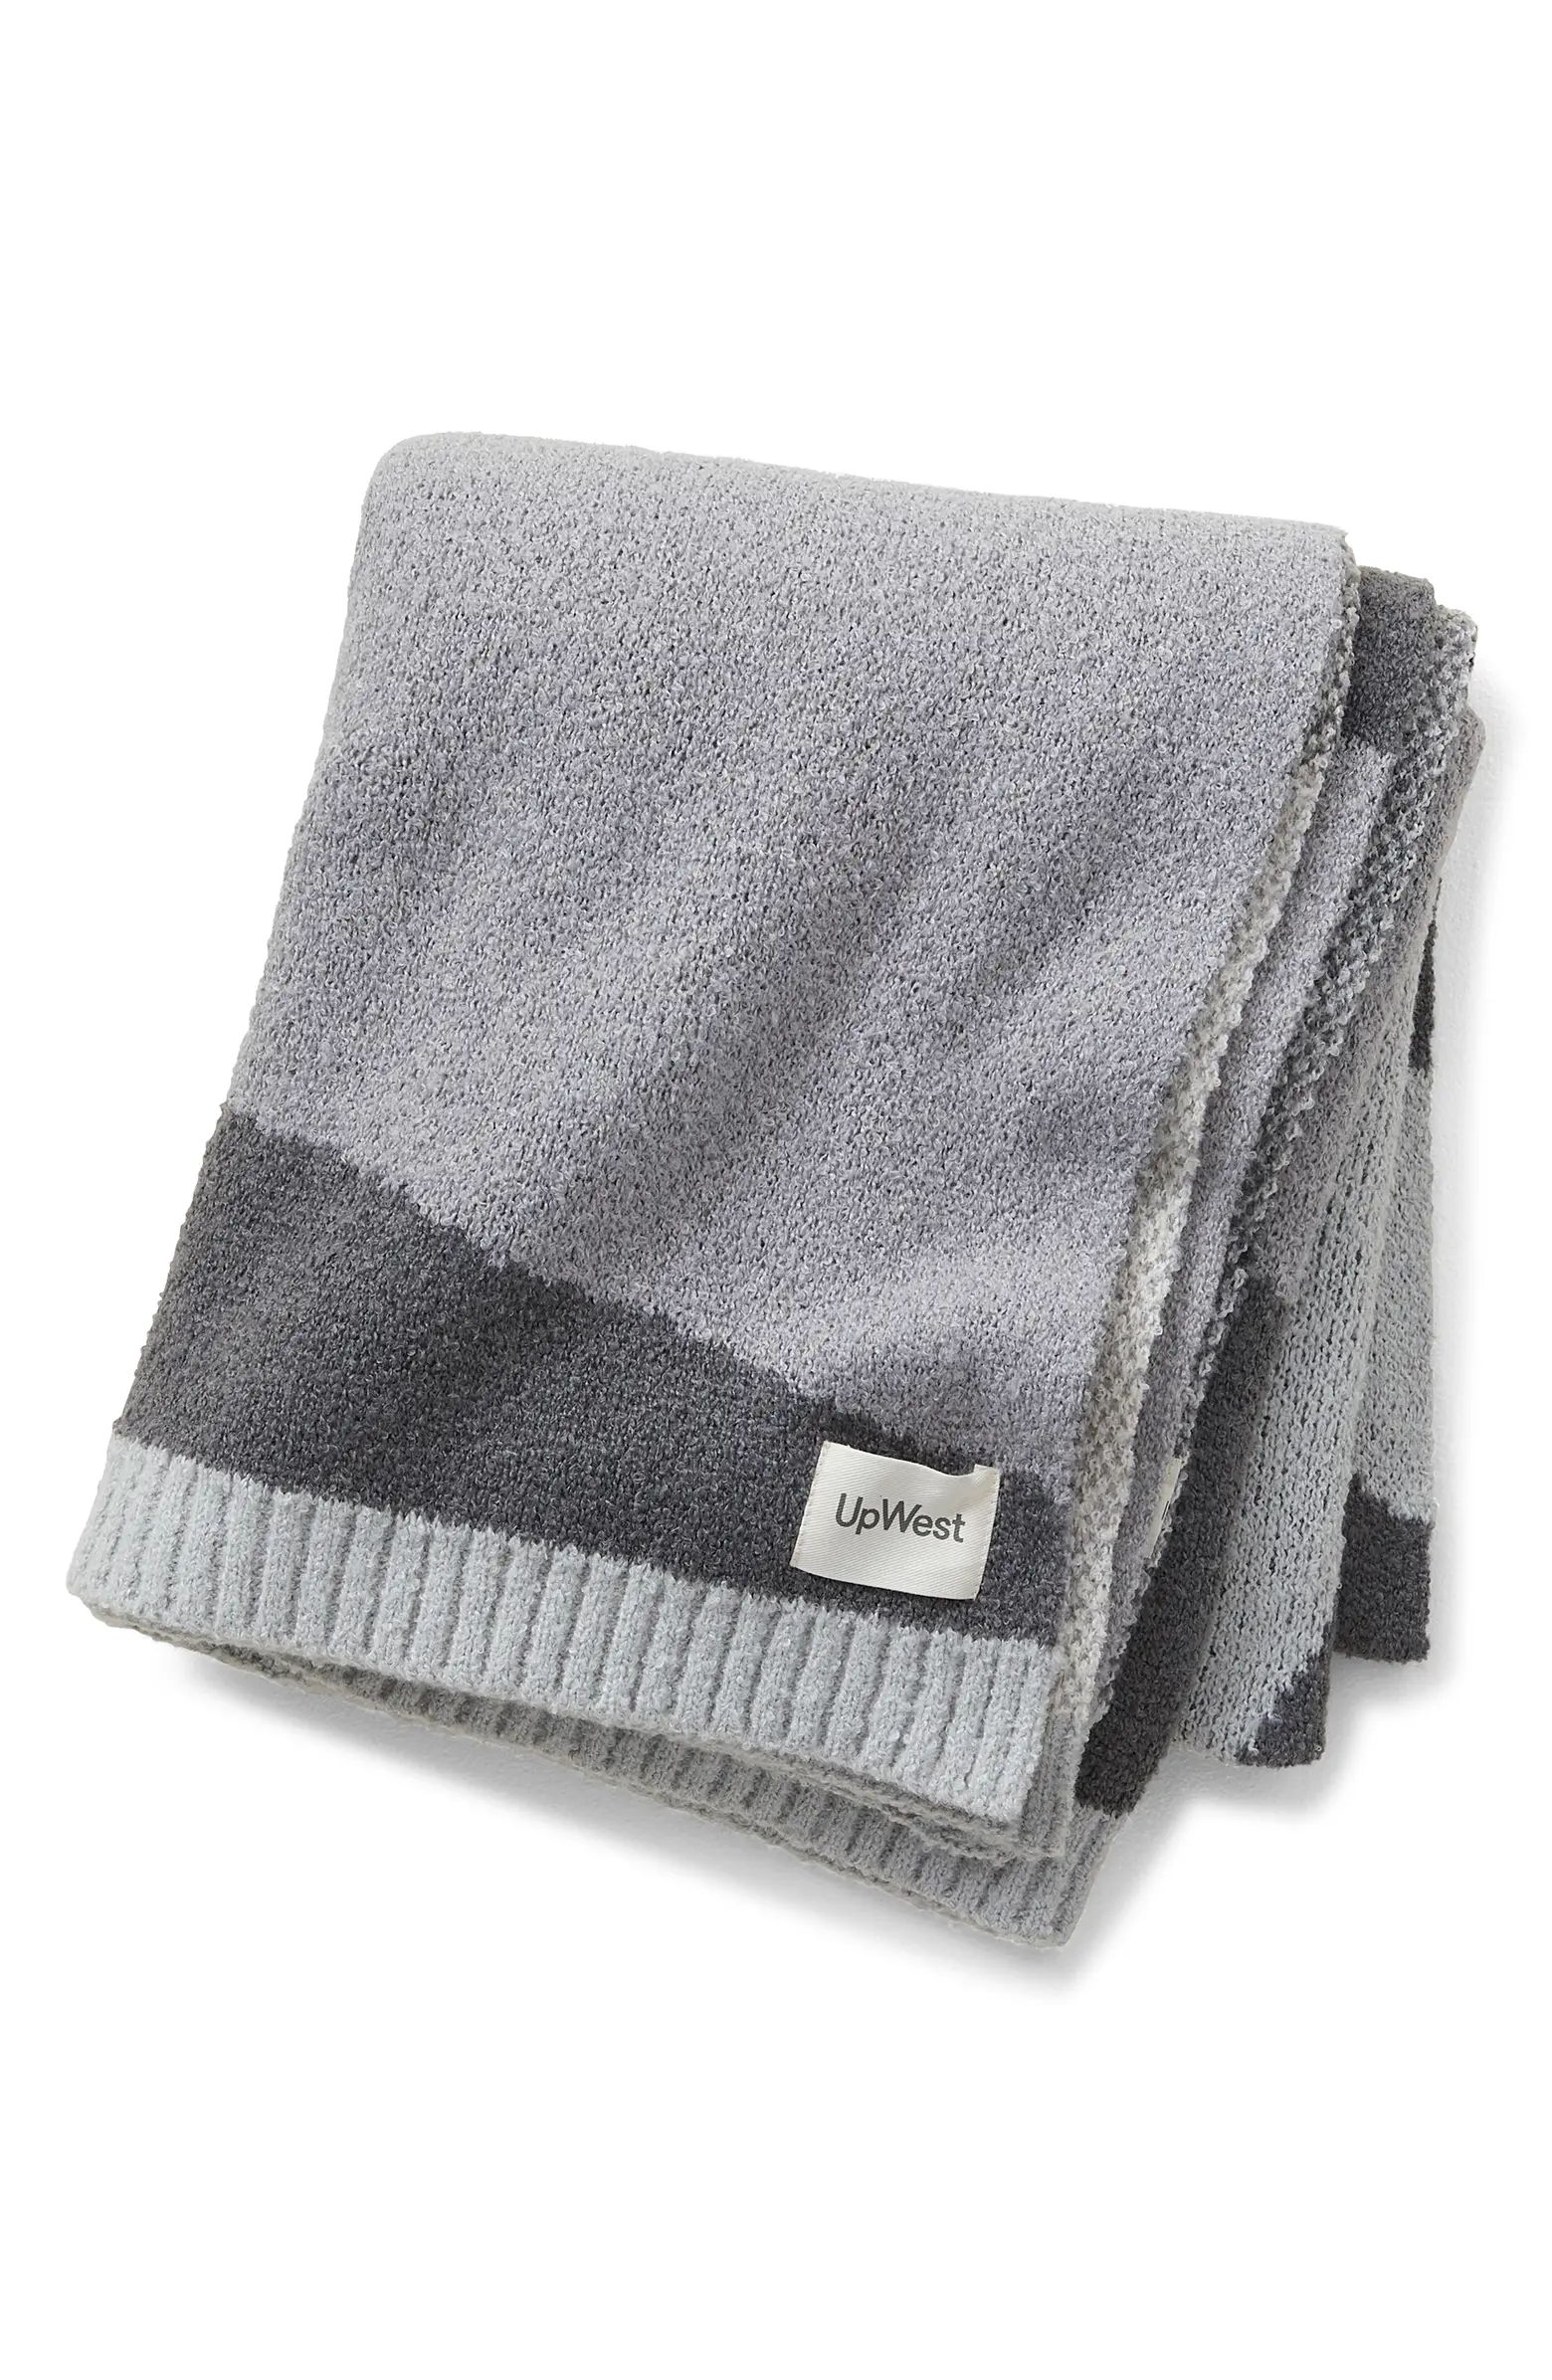 Cozy Sweater Knit Throw Blanket | Nordstrom